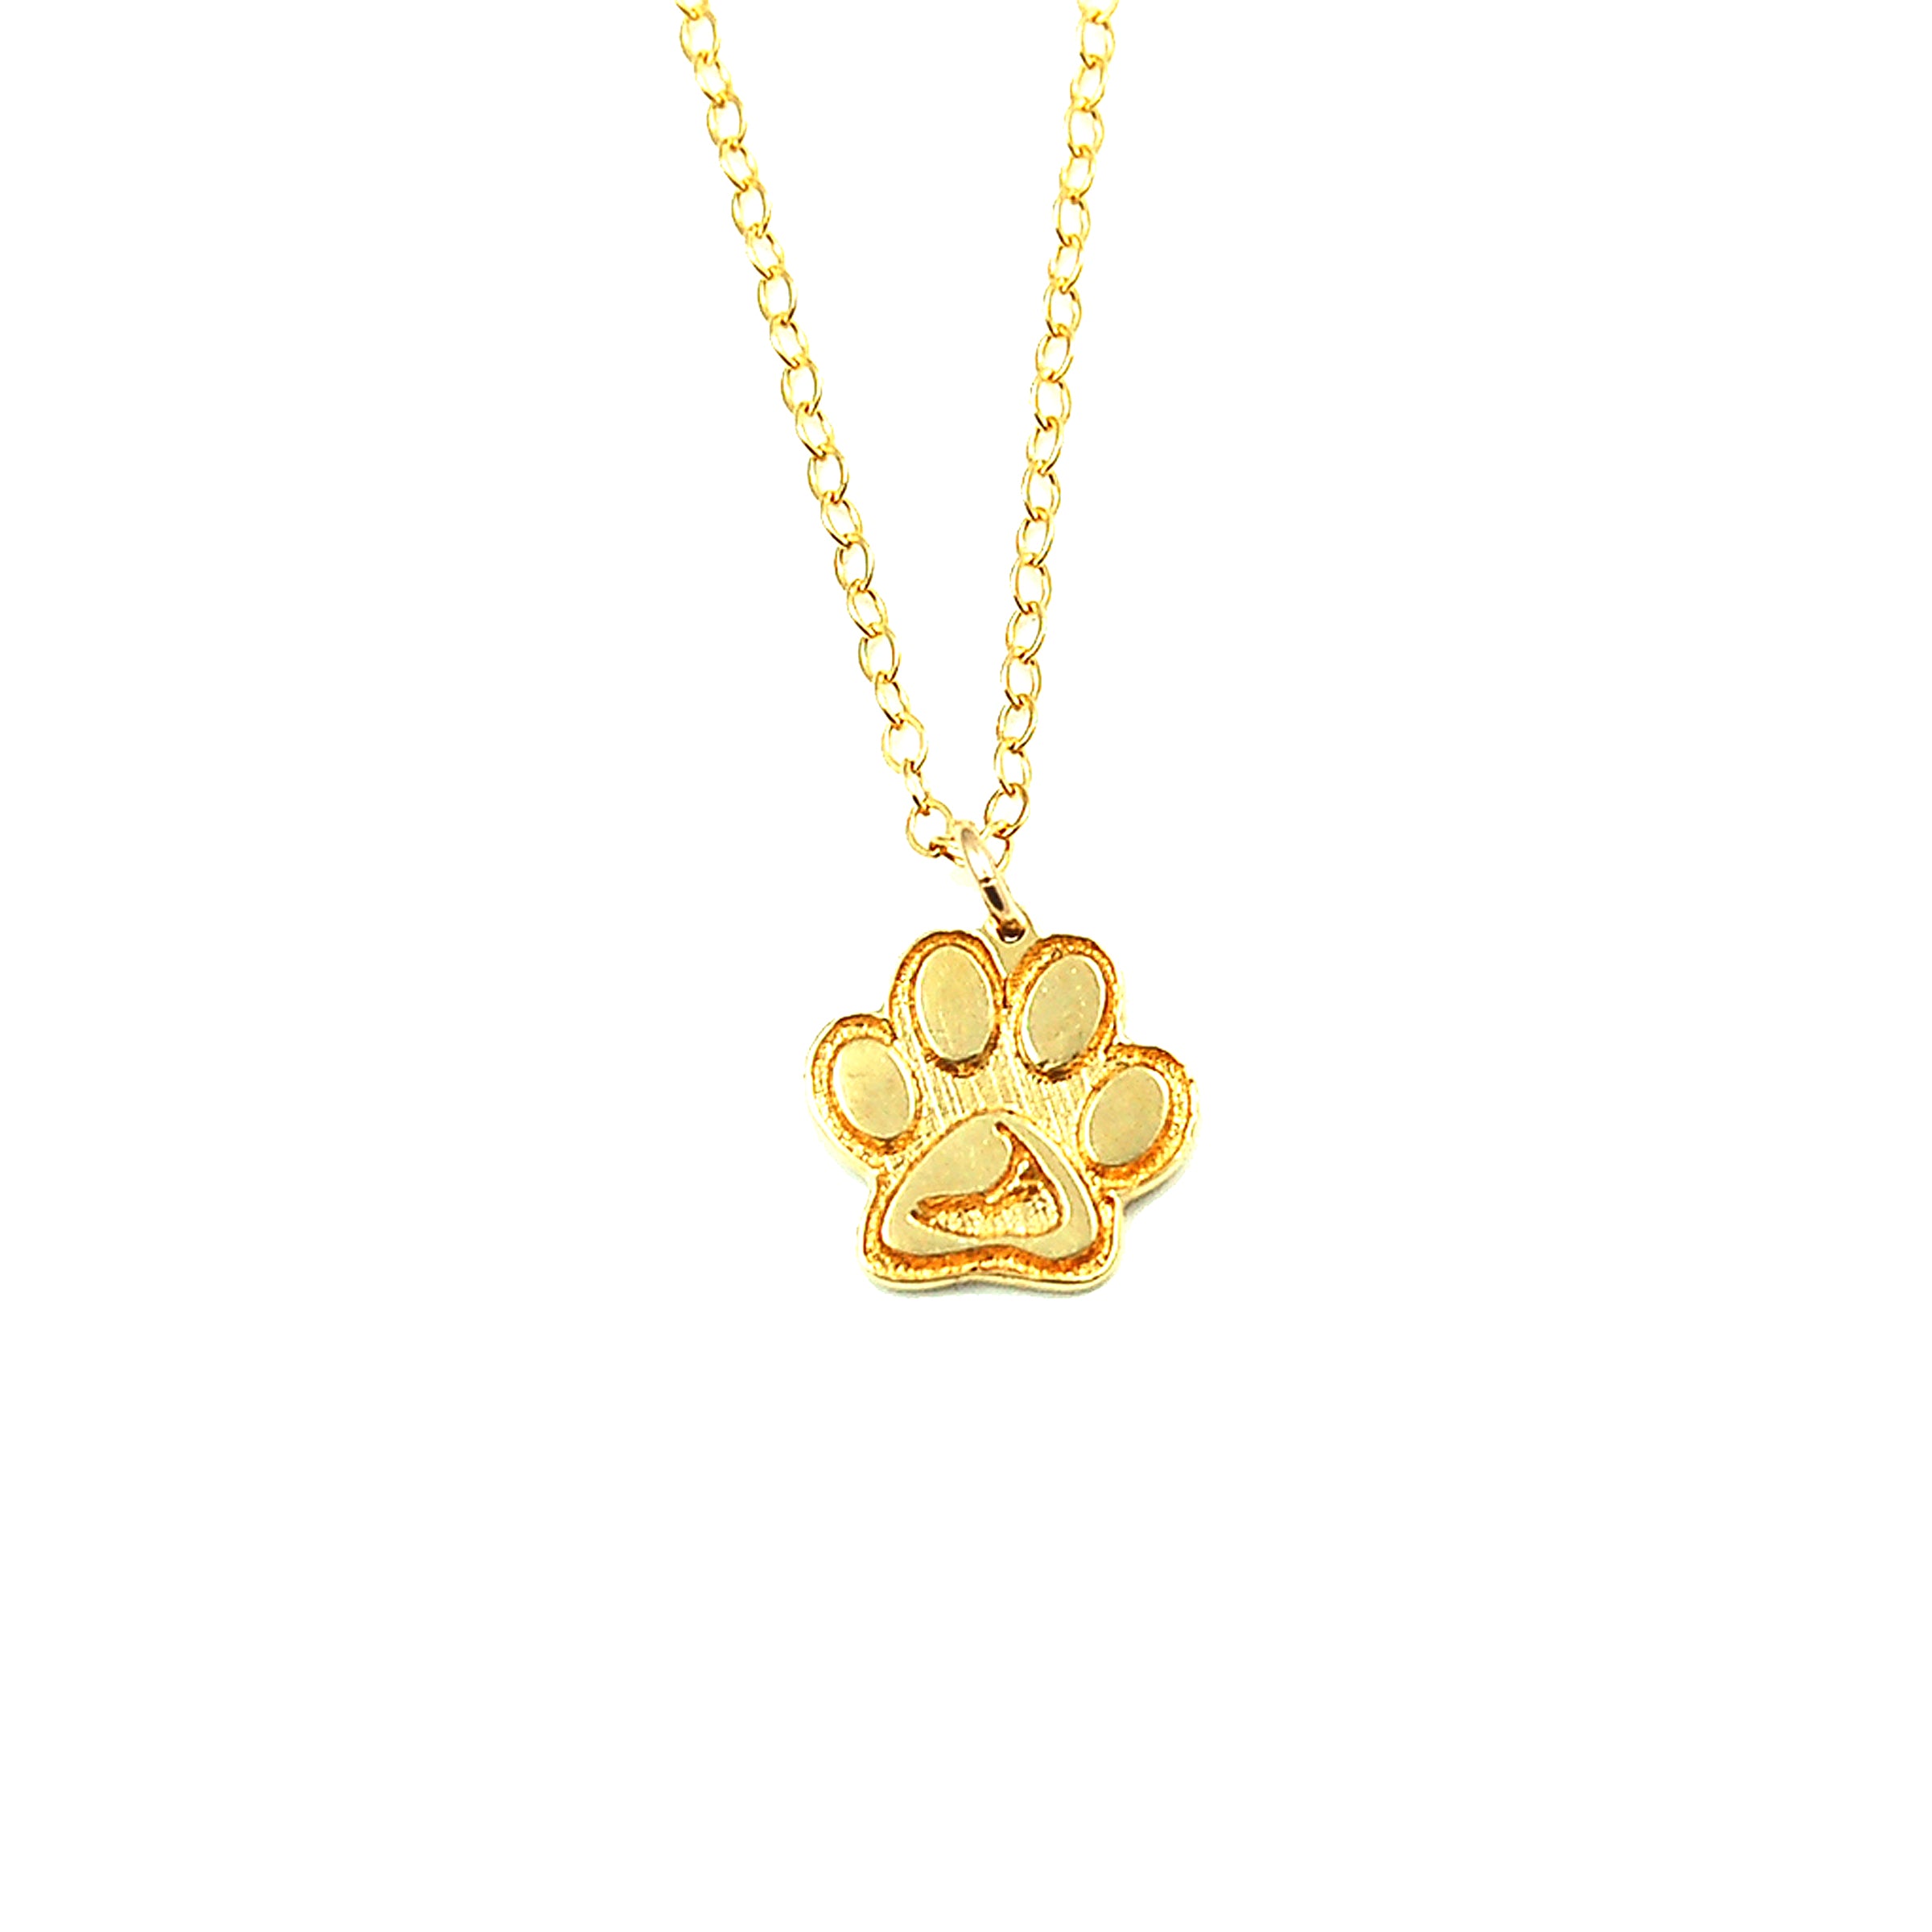 14k gold plate or sterling silver paw print charm or necklace with the island of nantucket impressed on the lower paw. 